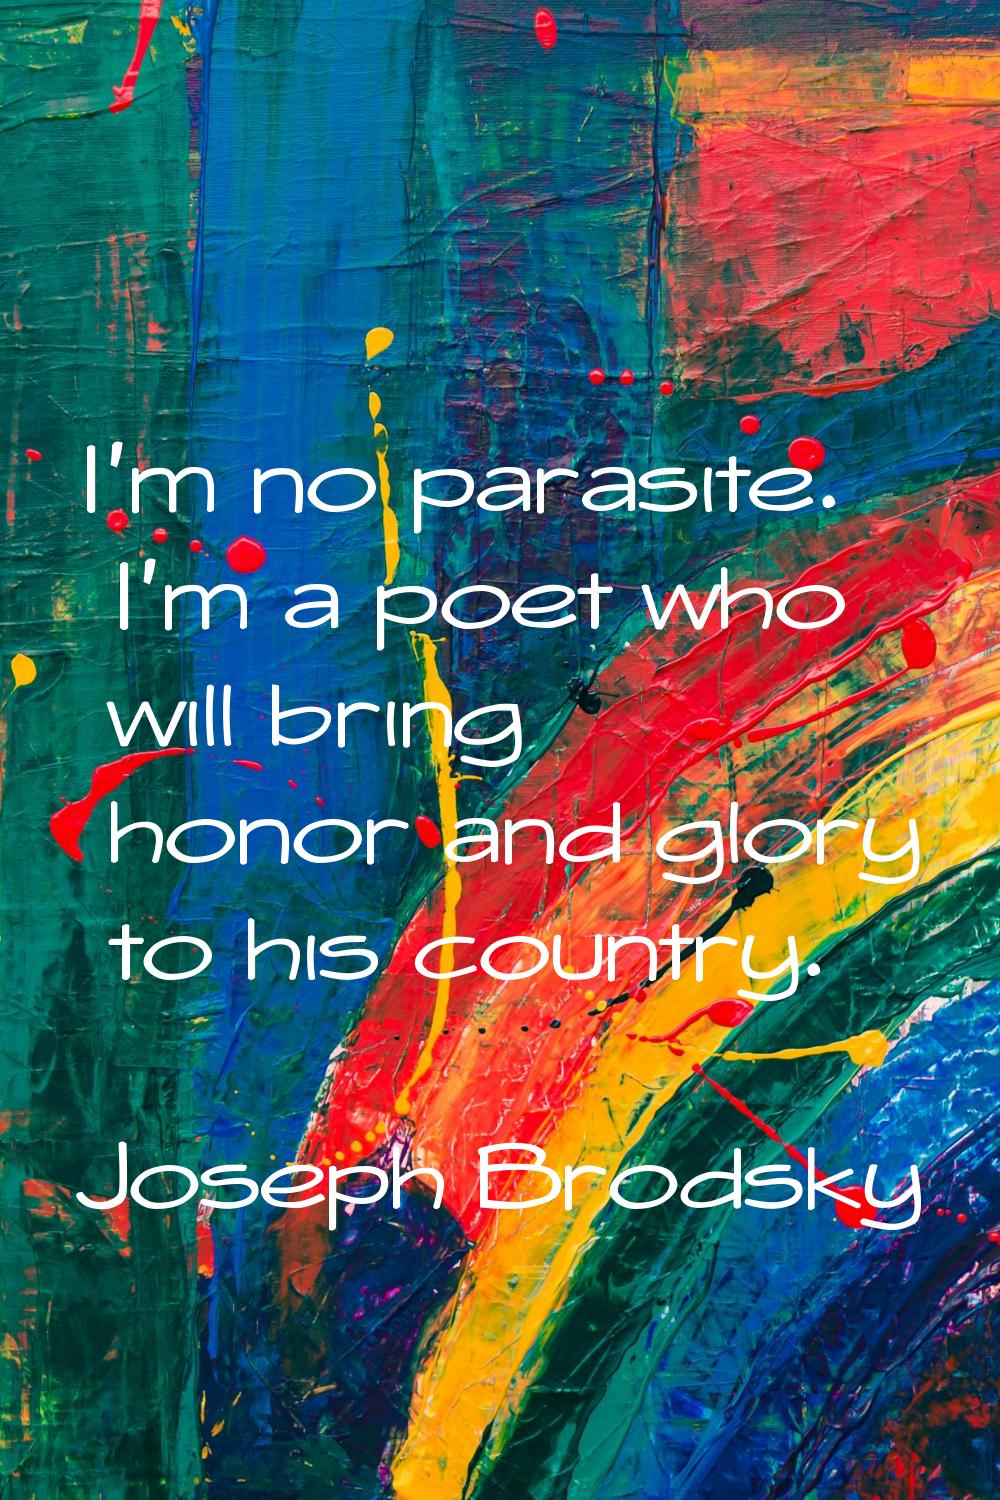 I'm no parasite. I'm a poet who will bring honor and glory to his country.